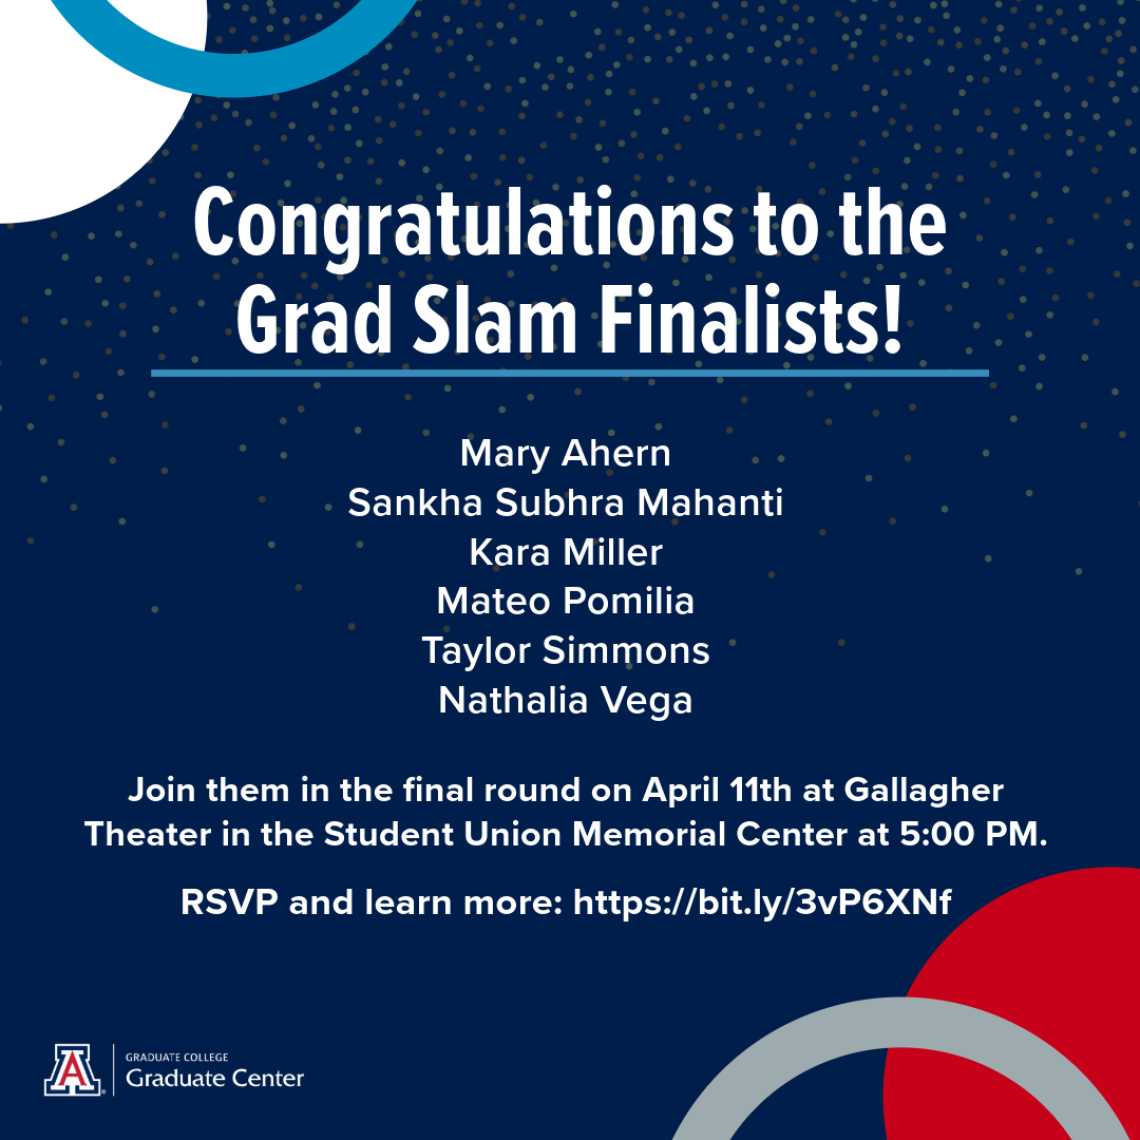 image with information regarding the grad slam finalists. Same information is provided below. 